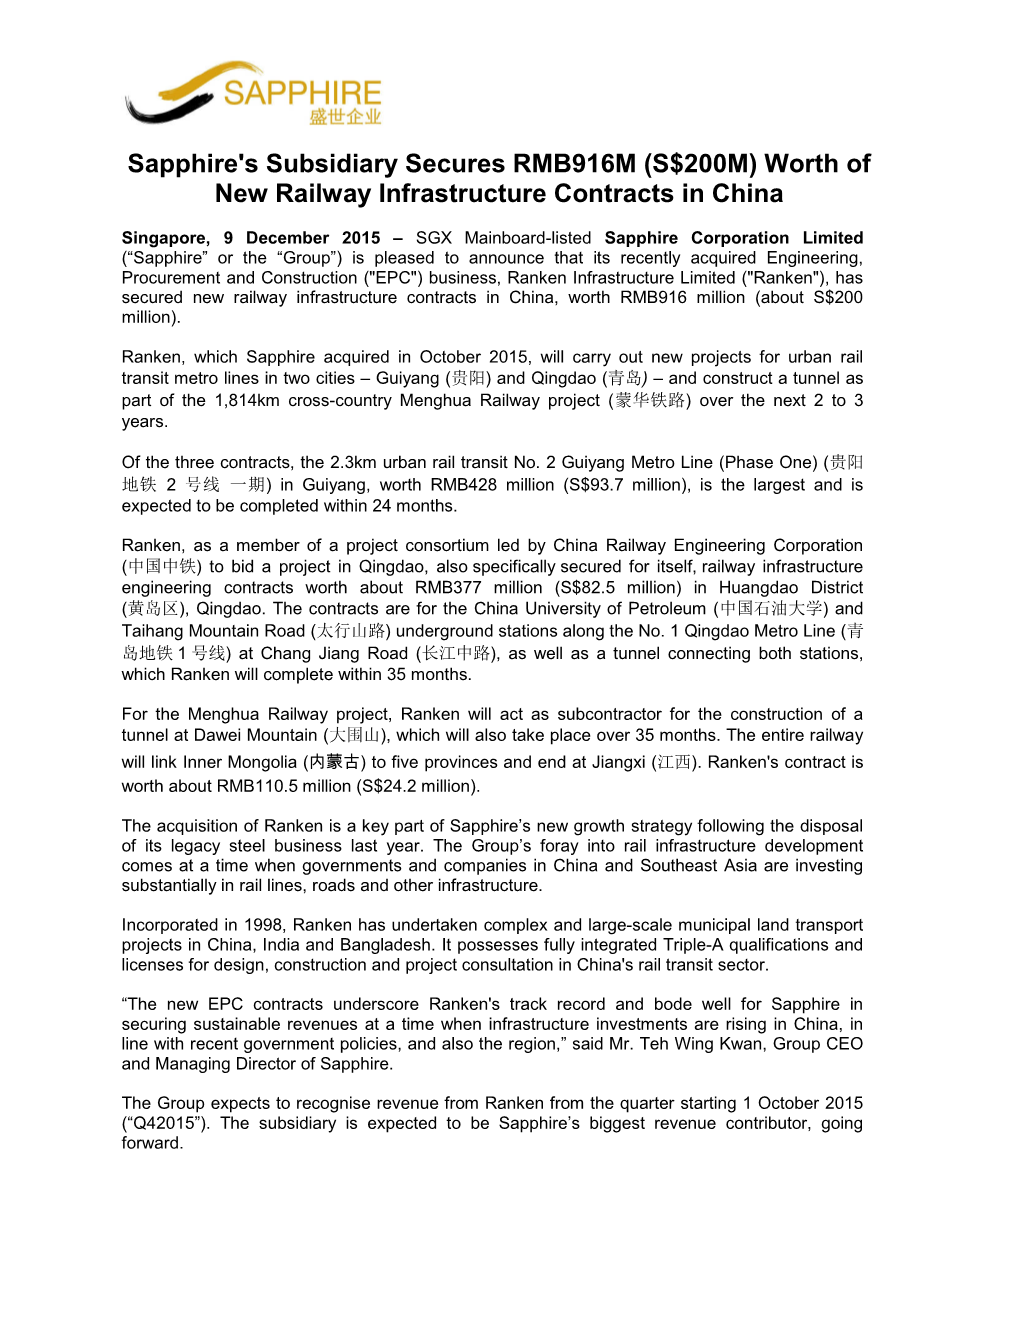 Worth of New Railway Infrastructure Contracts in China